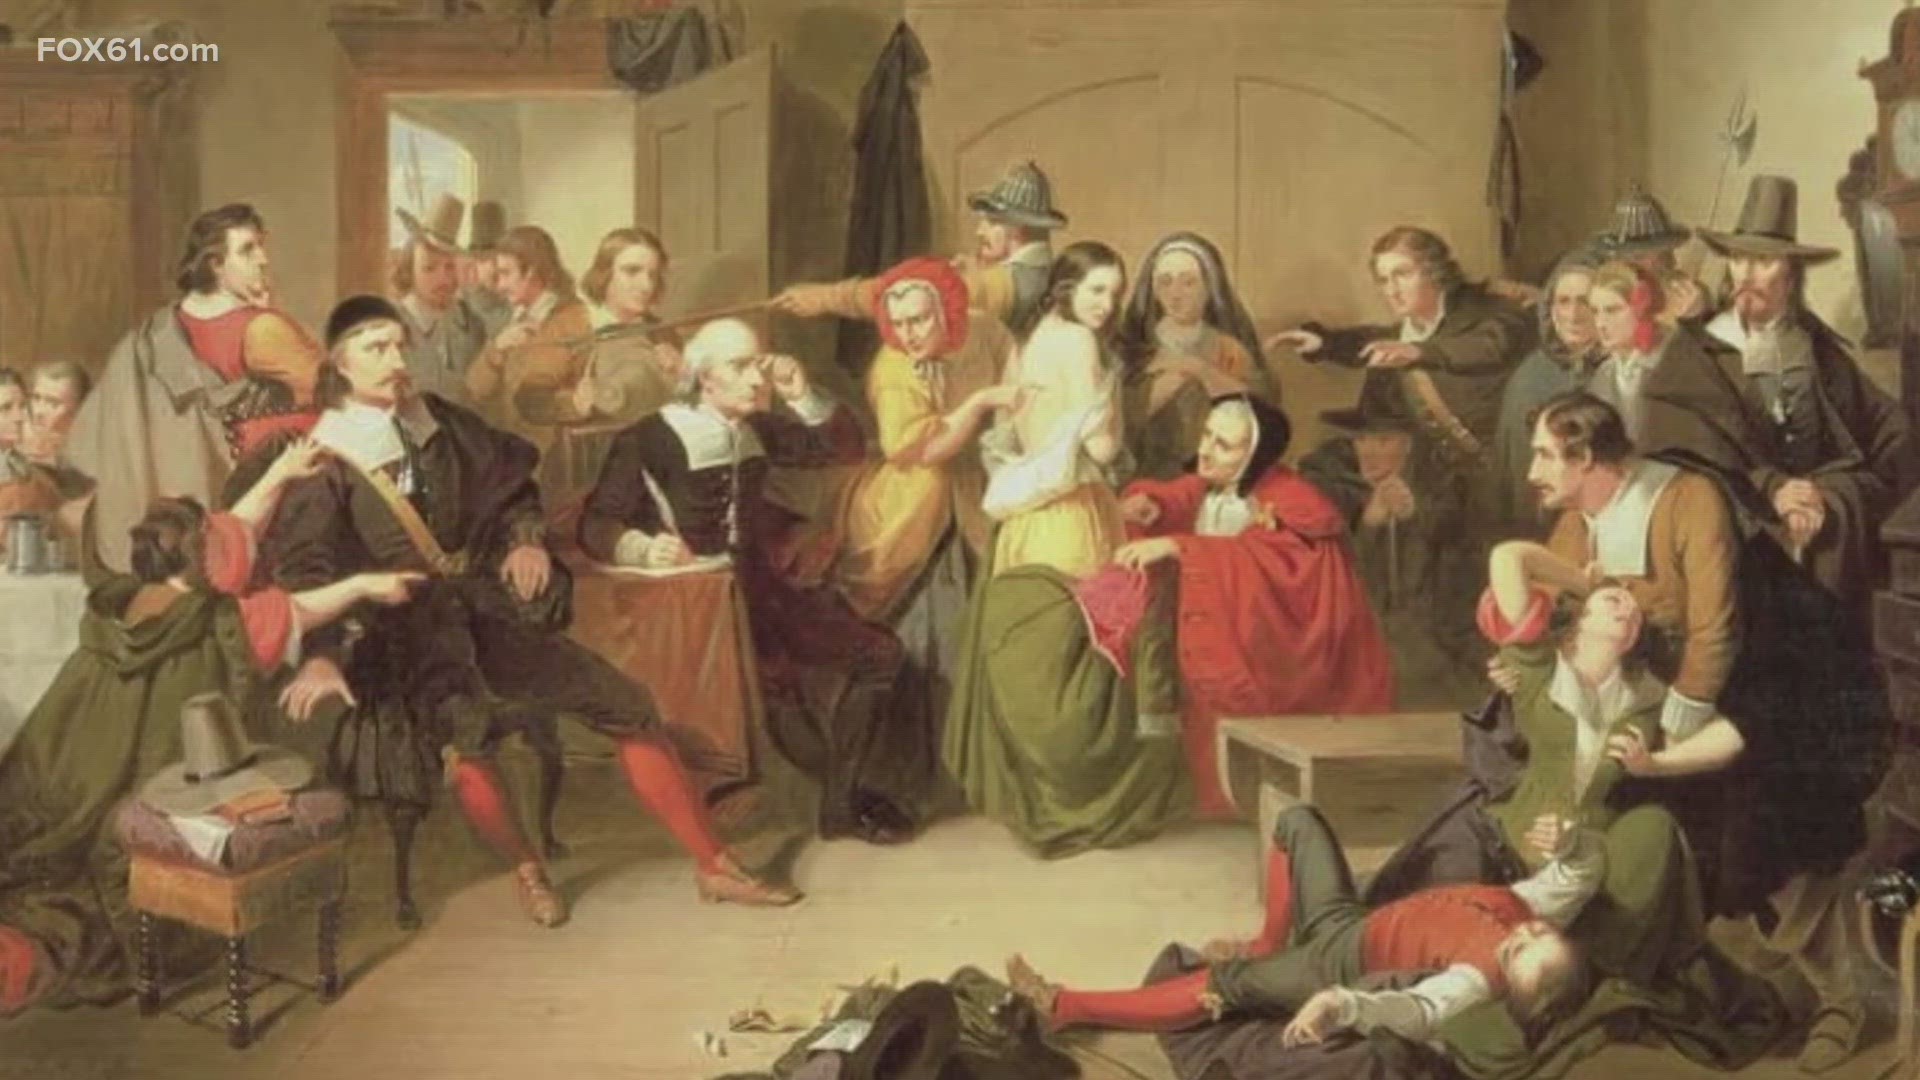 New documents offer look into Connecticut's witch trials | fox61.com